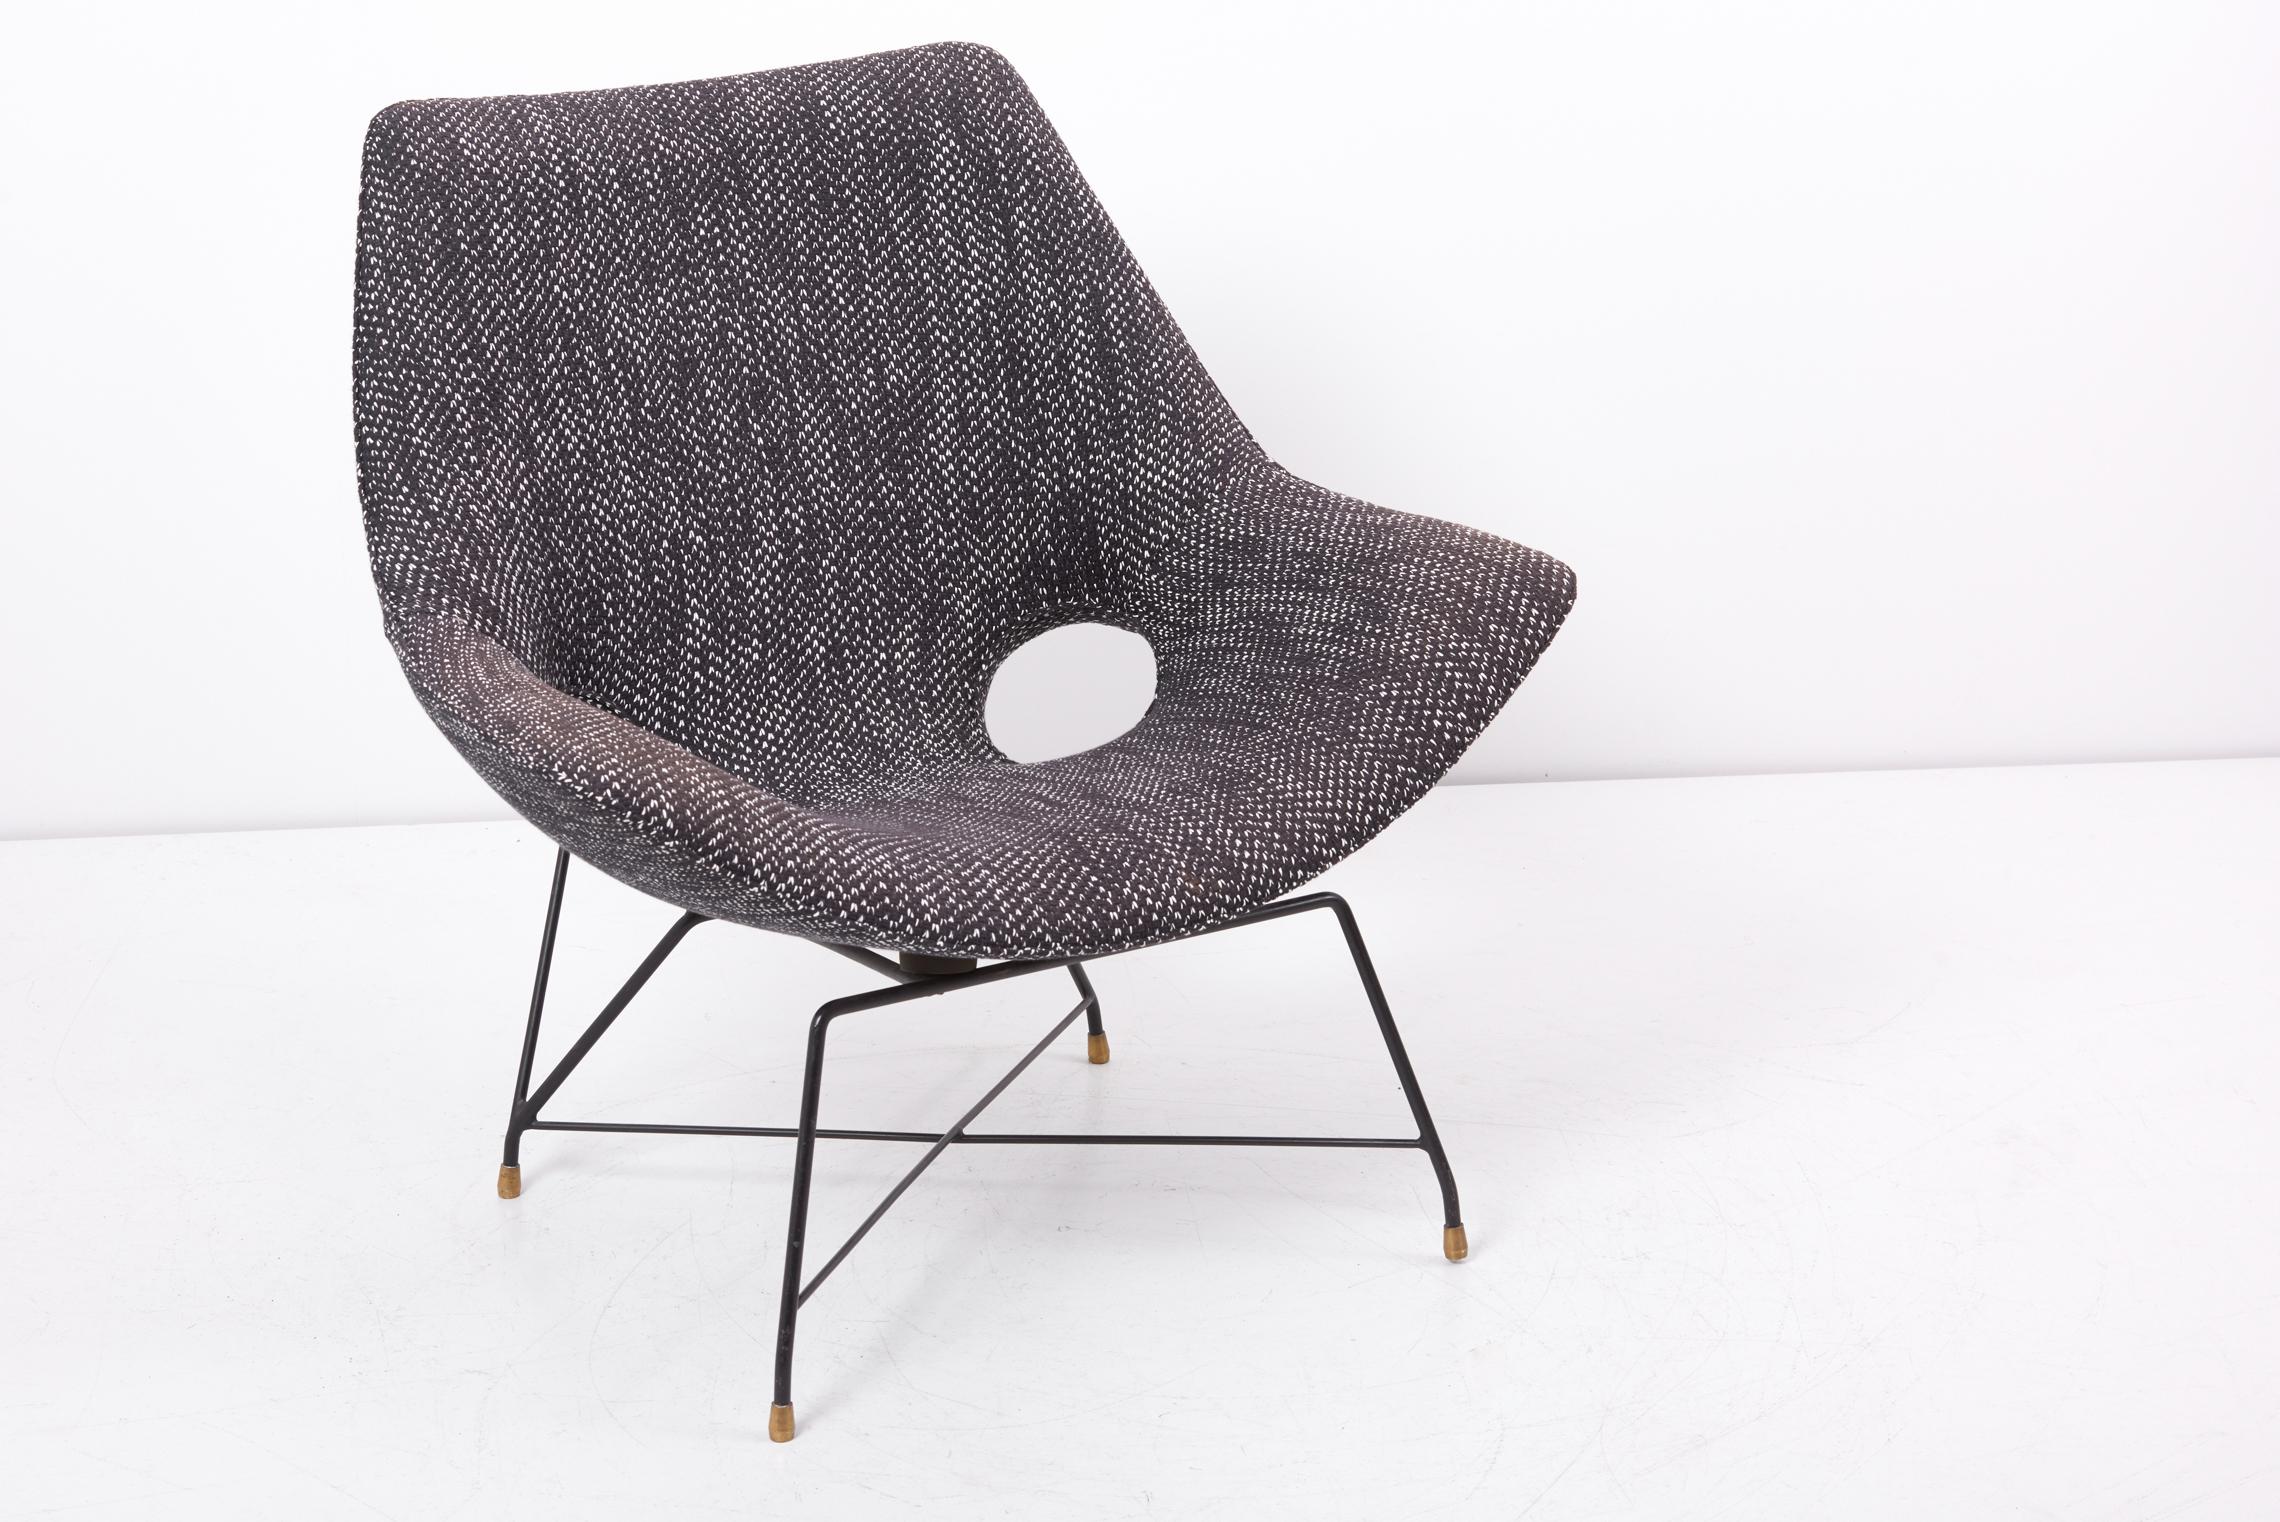 Lounge Chair by Augusto Bozzi for Saporiti in black & white fabric, Italy, 1950s For Sale 5